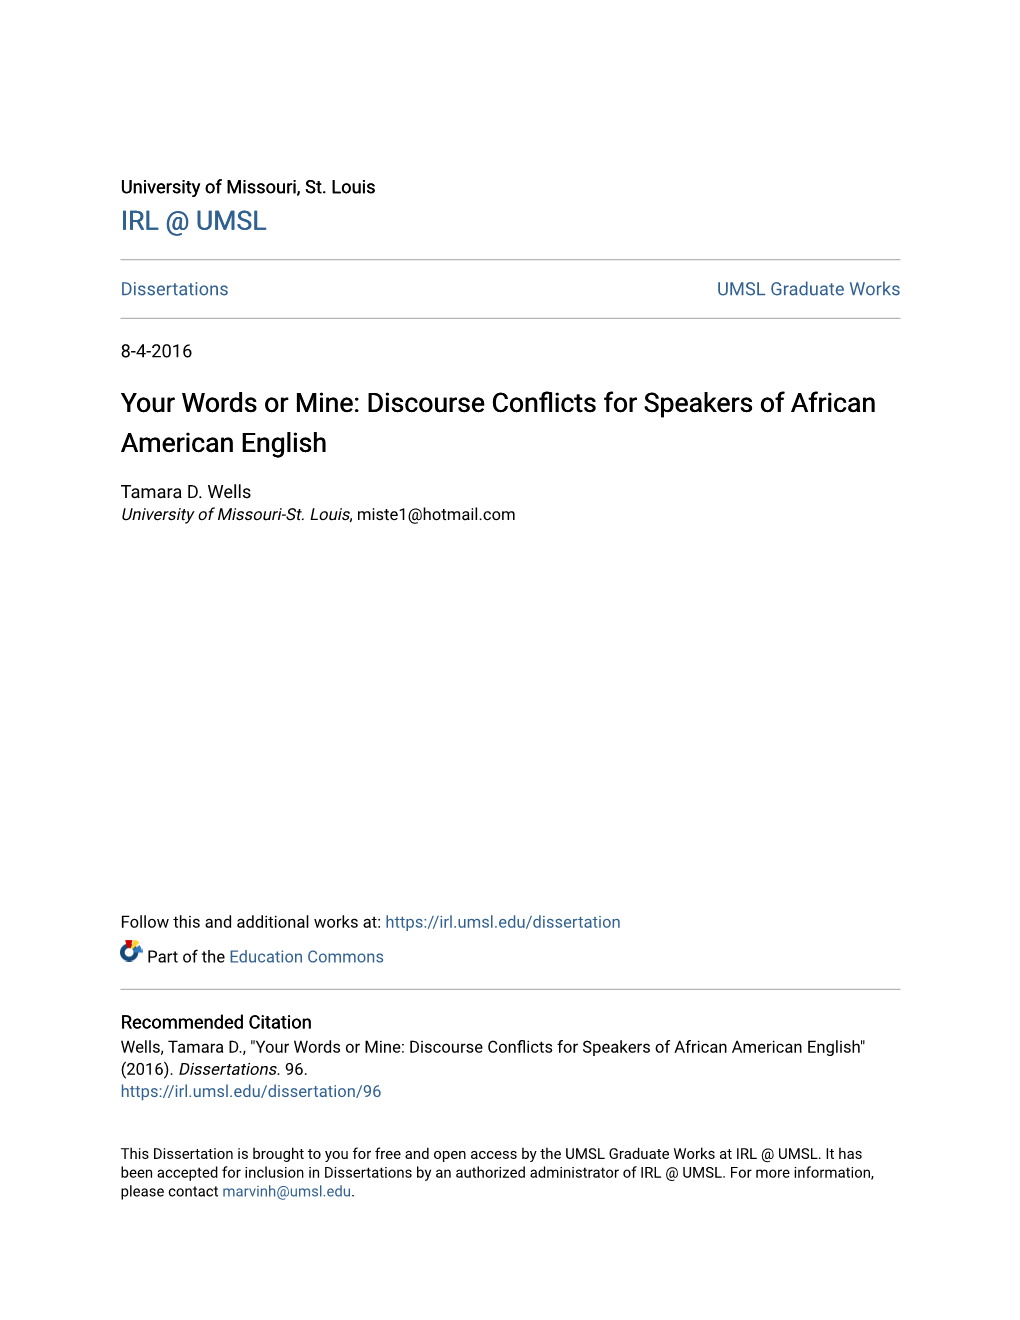 Discourse Conflicts for Speakers of African American English